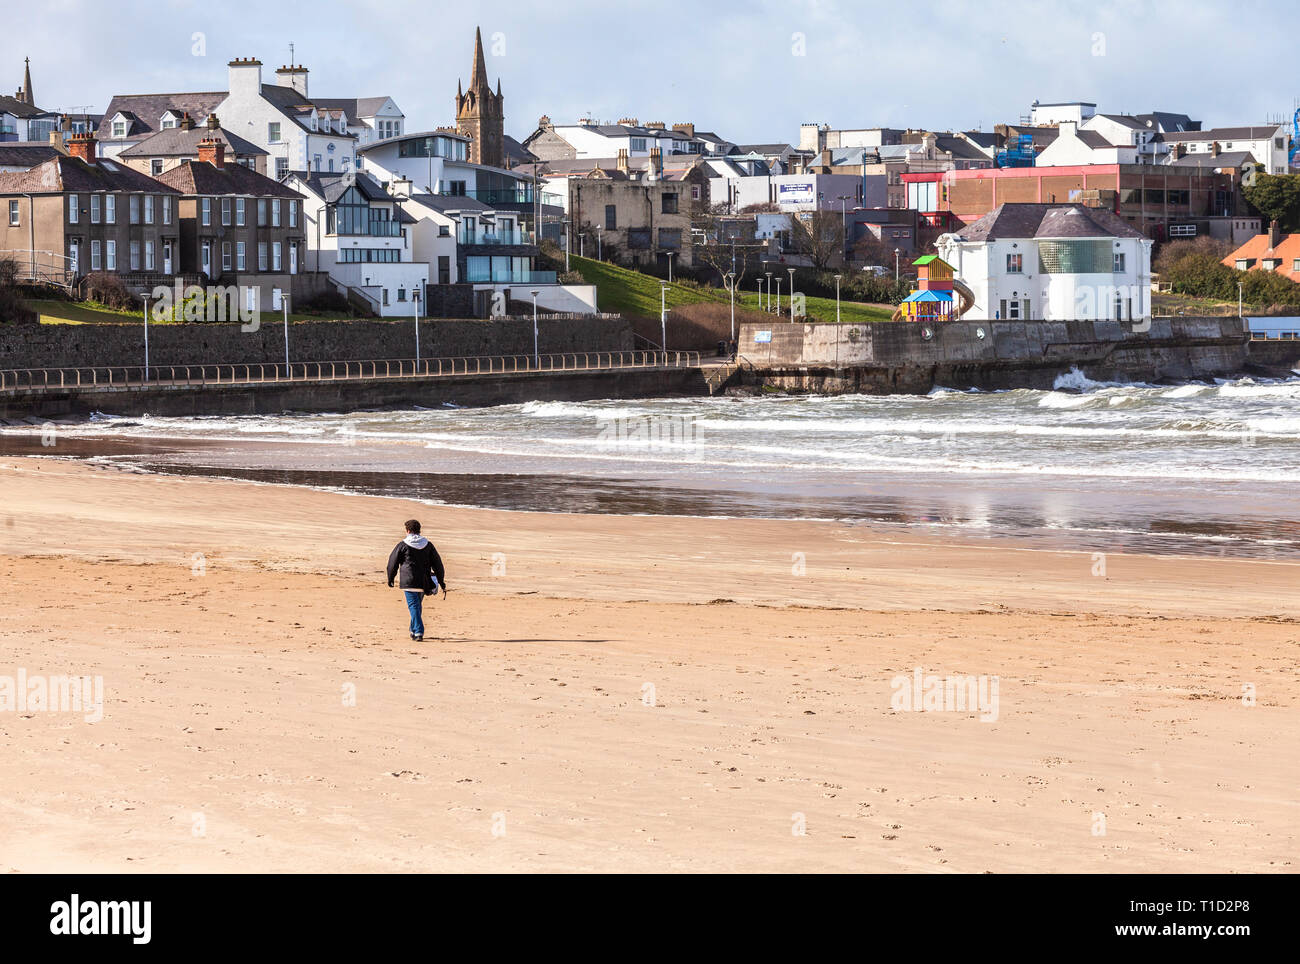 Portrush, Northern Ireland, UK - March 11, 2019: A lone figure walking on East Strand Beach on a blustery March day Stock Photo